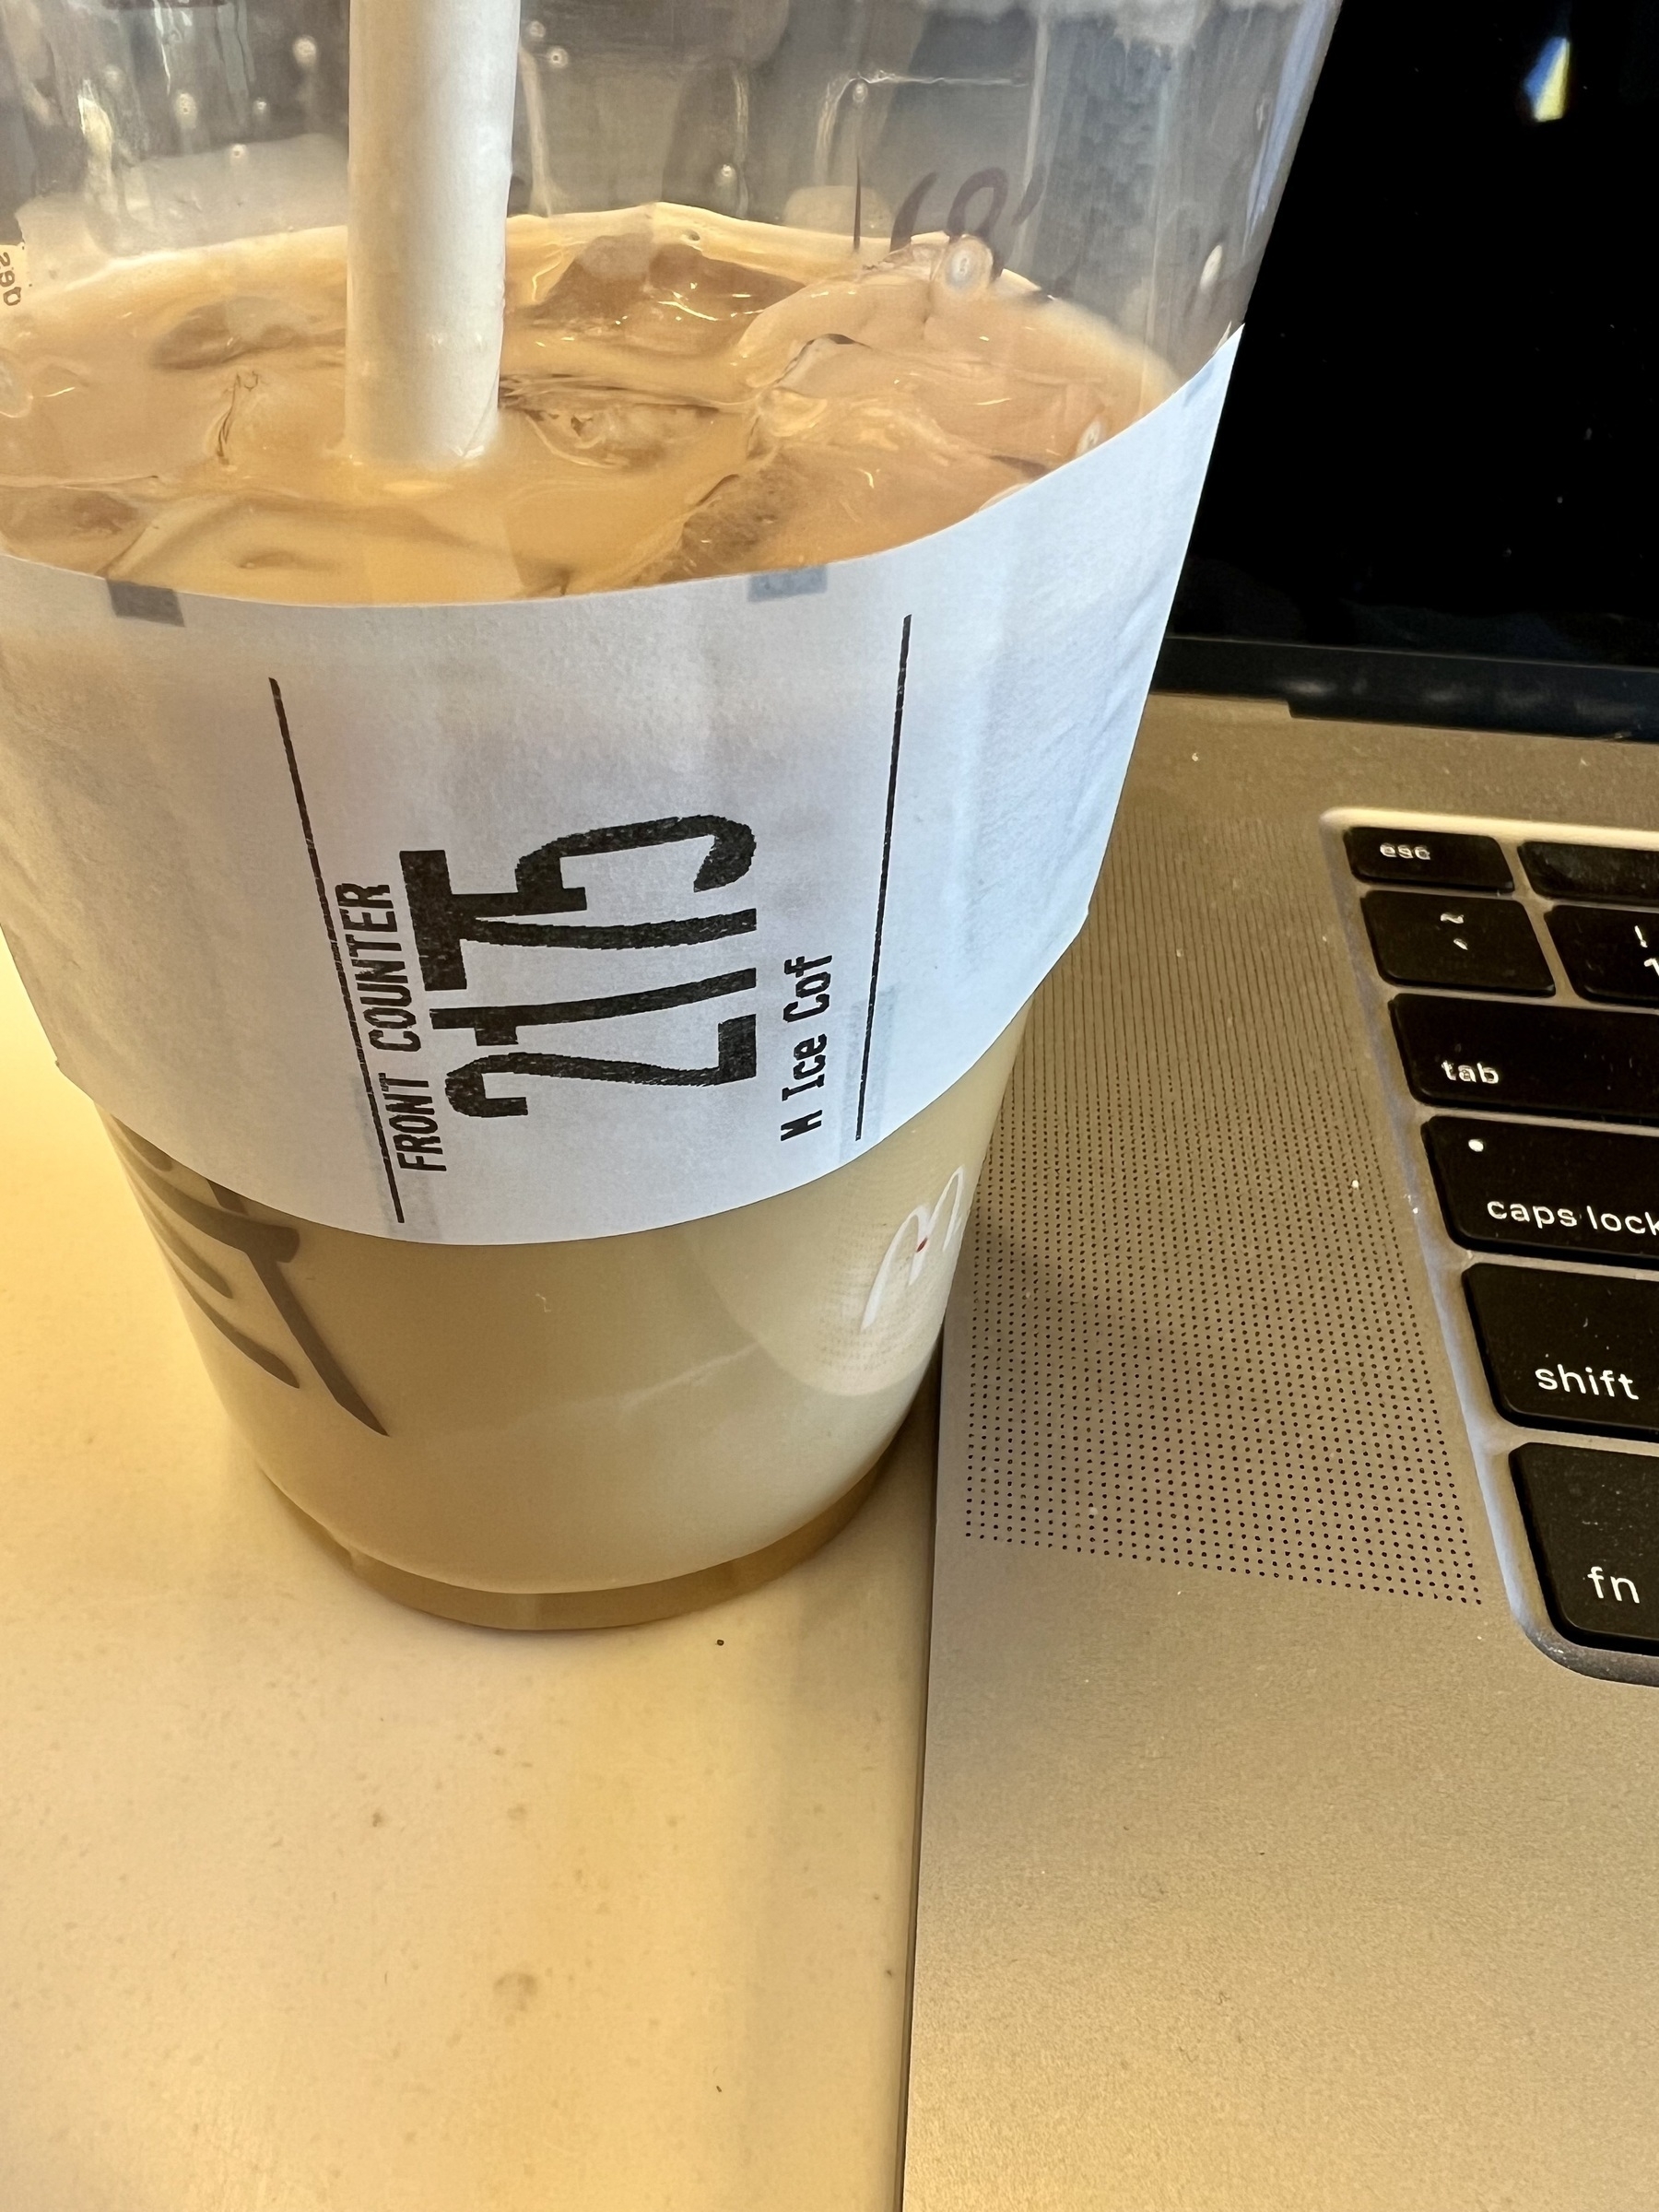 An iced coffee drink with the number 2175 on the side and “ice cof” as the description on the label. 